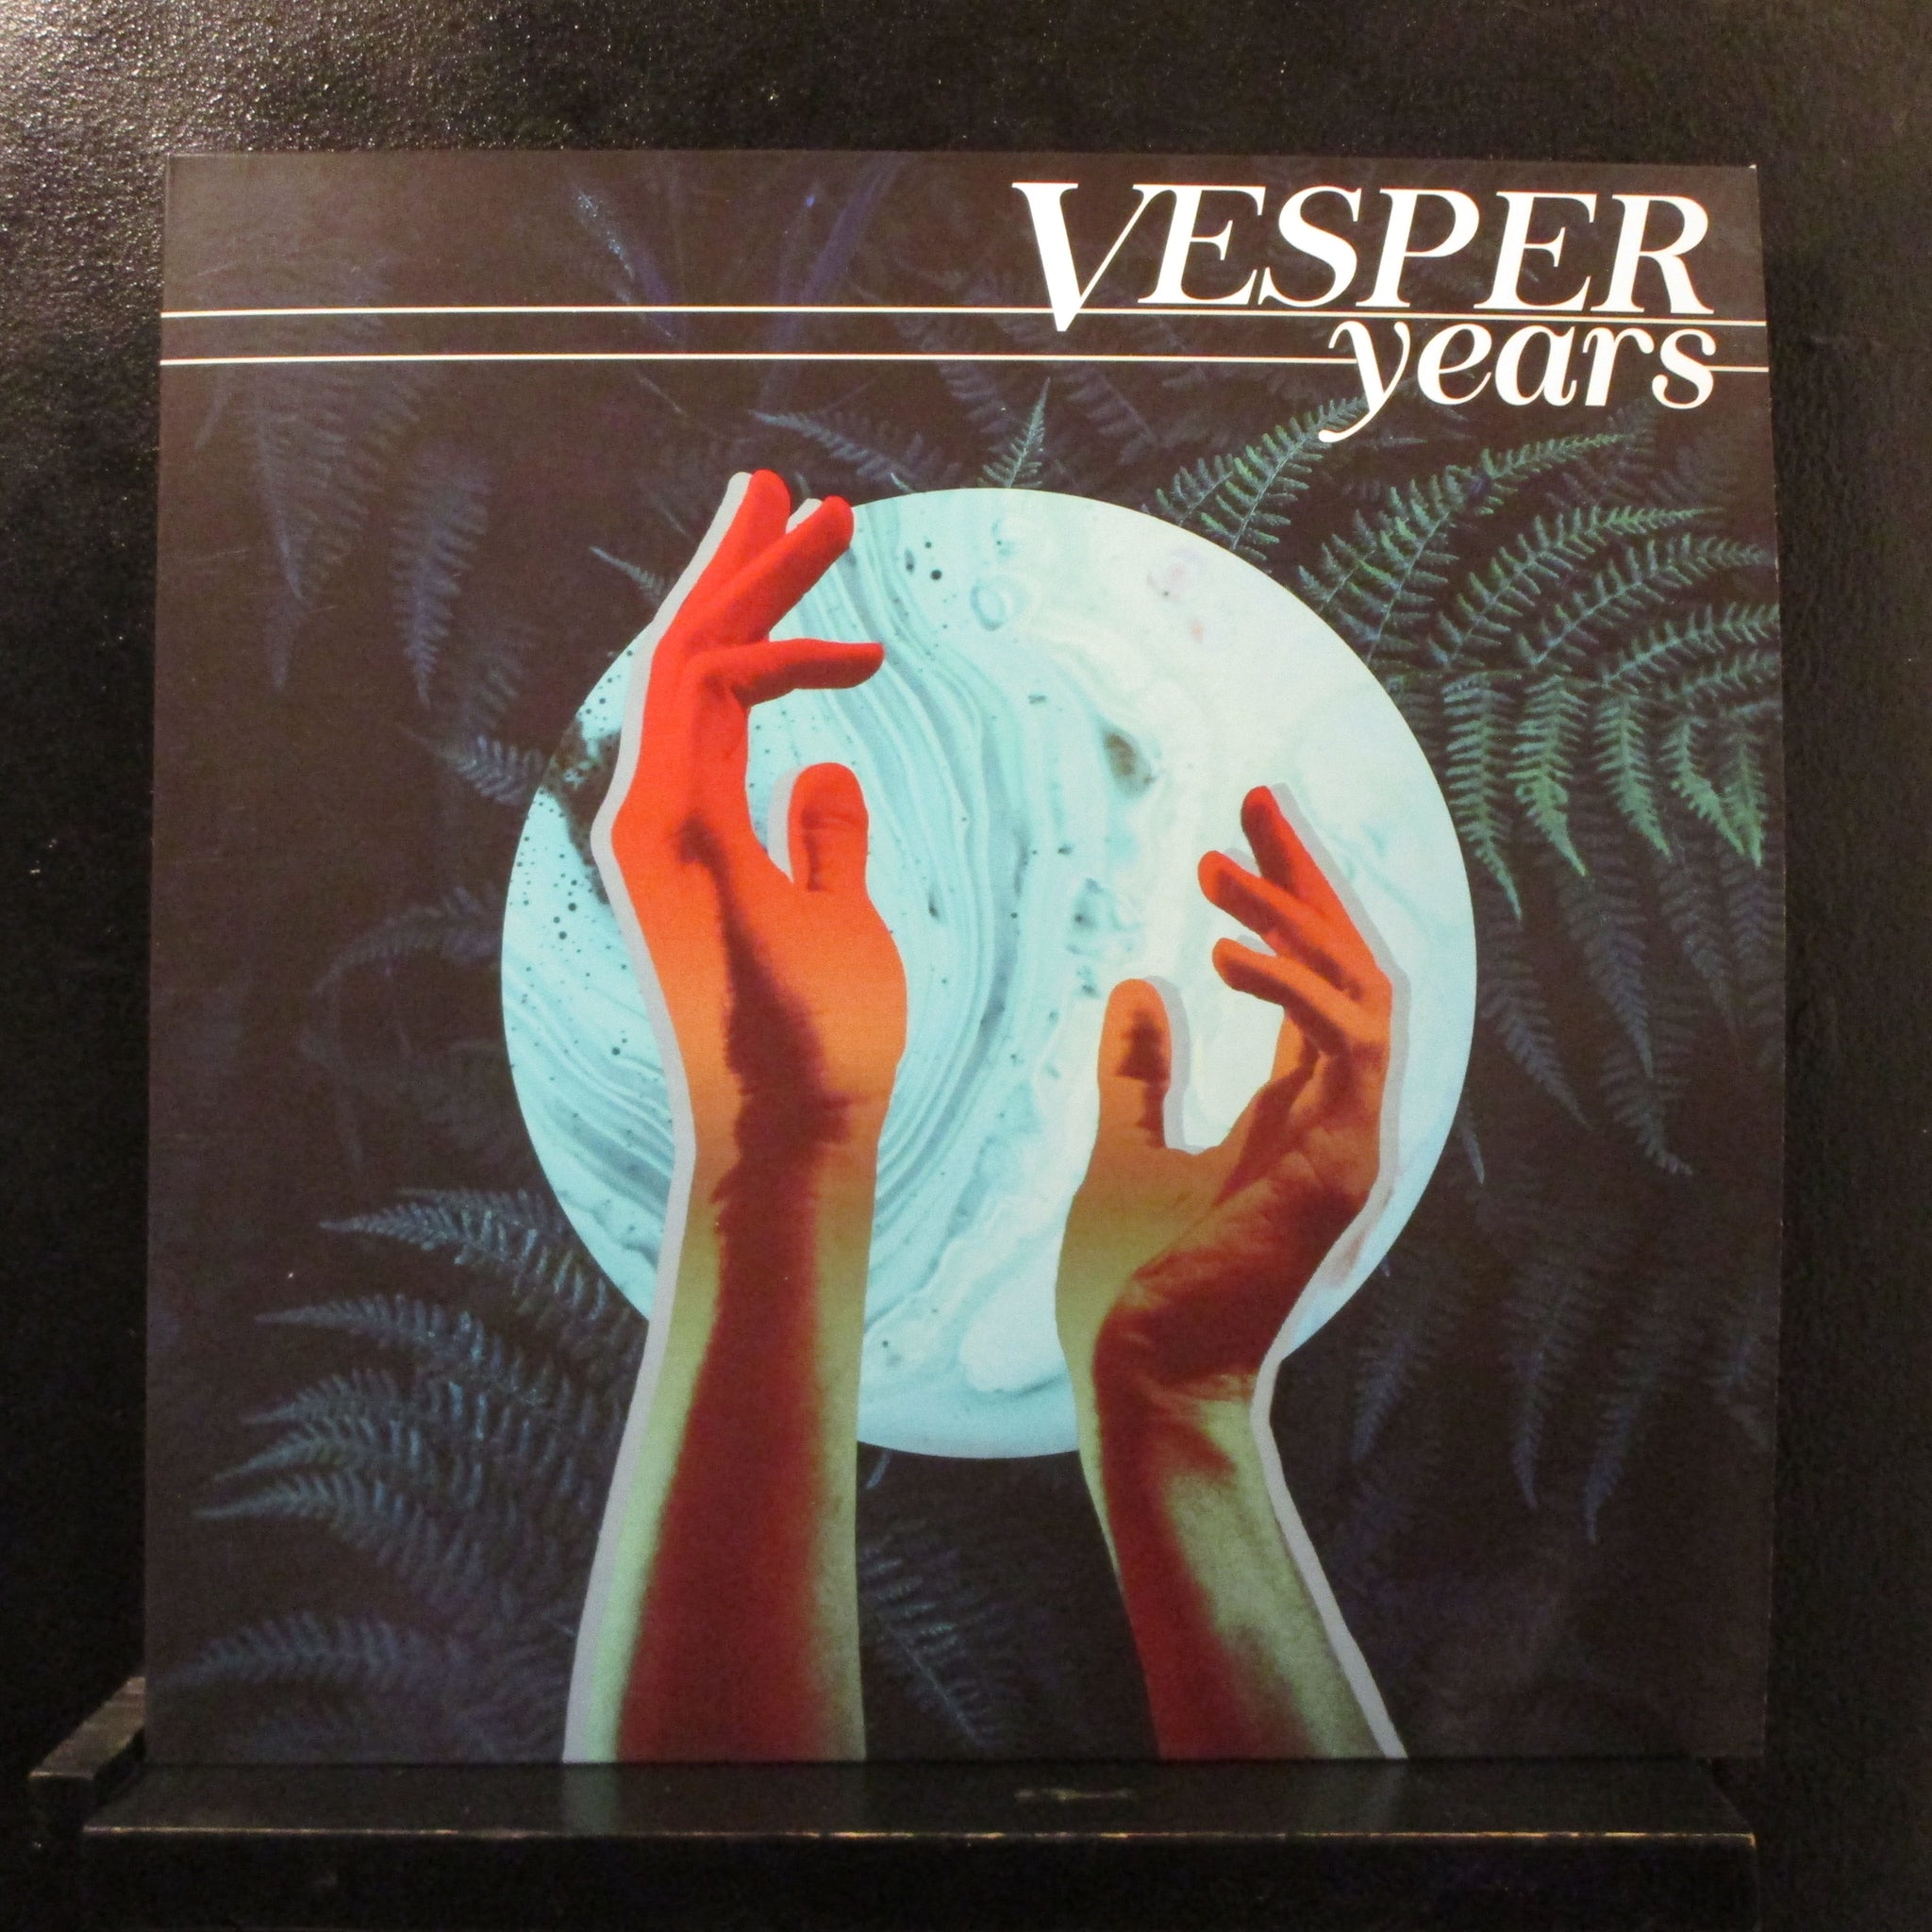 Vesper - Years - New LP Record 2019 Shuga Records Wax Mage Vinyl, Signed & Numbered (12/26) - Pop / Synth Pop